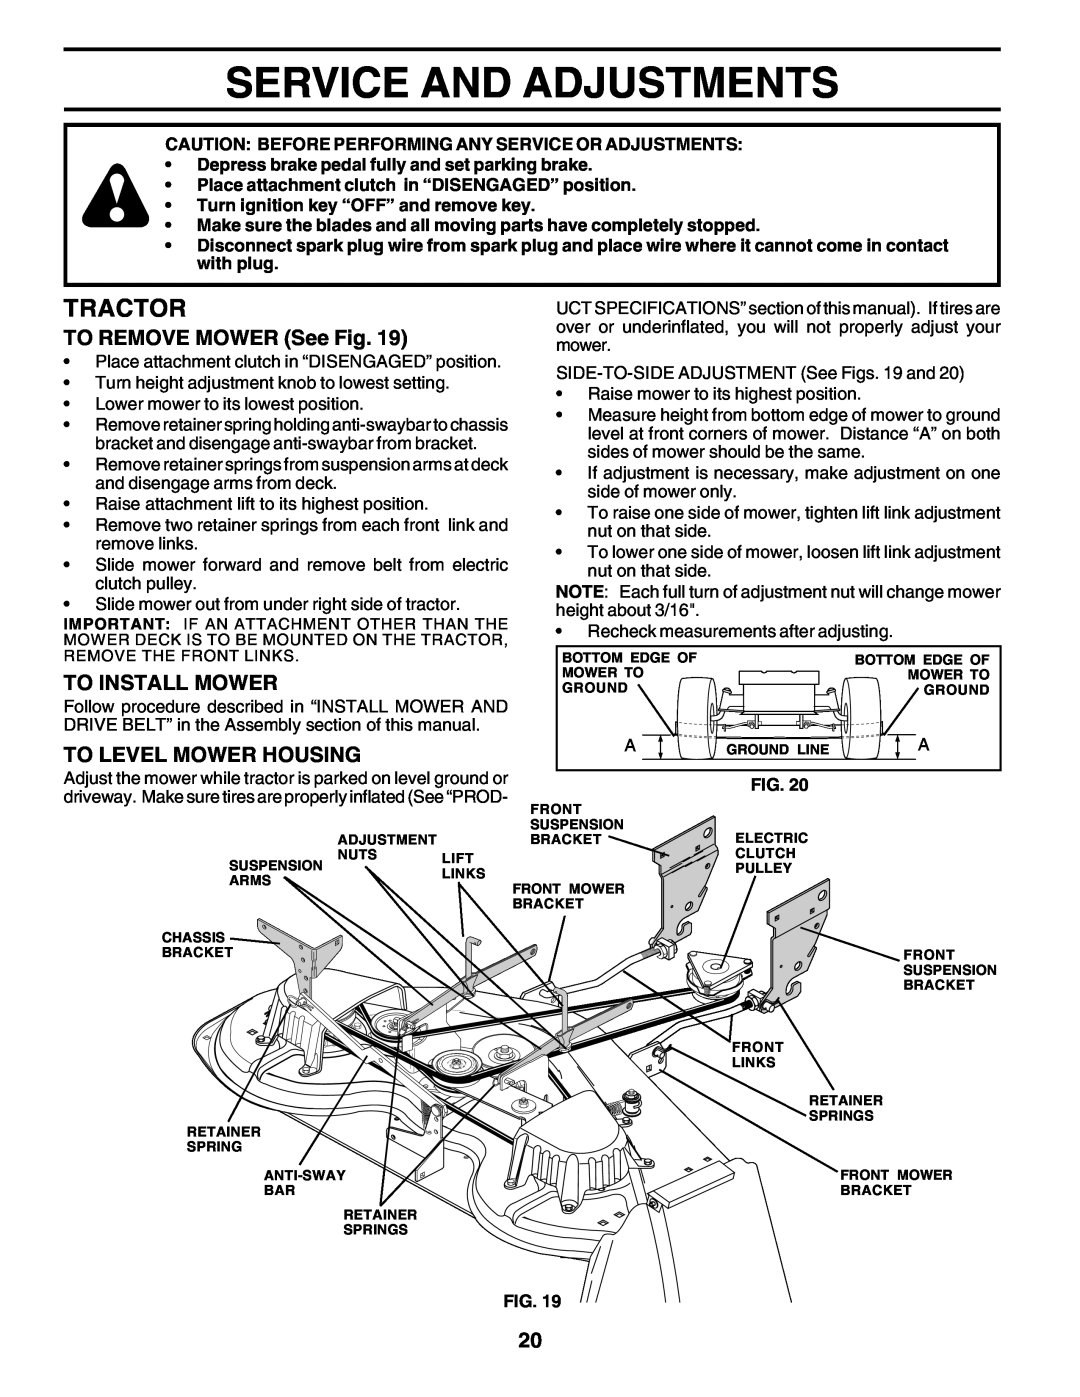 Poulan PRGT22H50B Service And Adjustments, Tractor, TO REMOVE MOWER See Fig, To Install Mower, To Level Mower Housing 